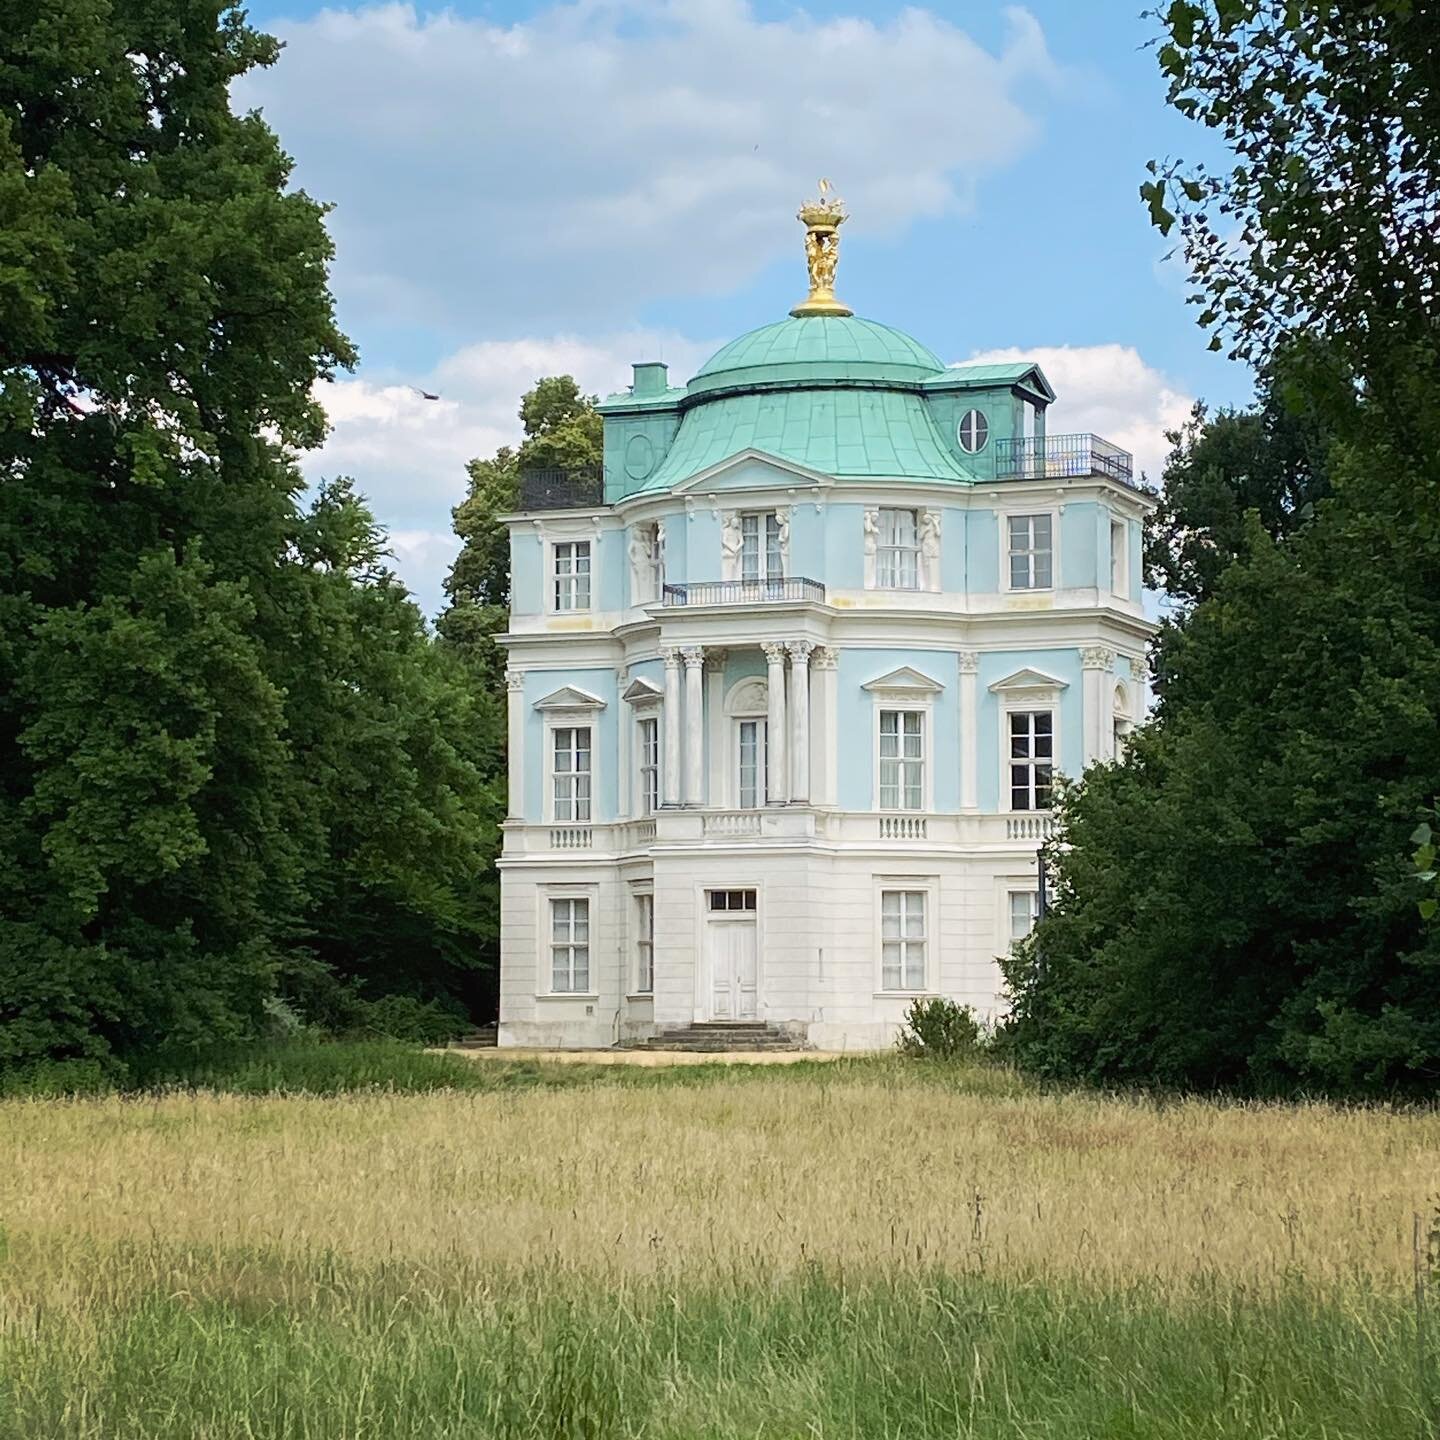 I&rsquo;m discovering Berlin today via scooter. One of my finds: Deep within the Prussian royal gardens exists this beautifully perfect Summer retreat.